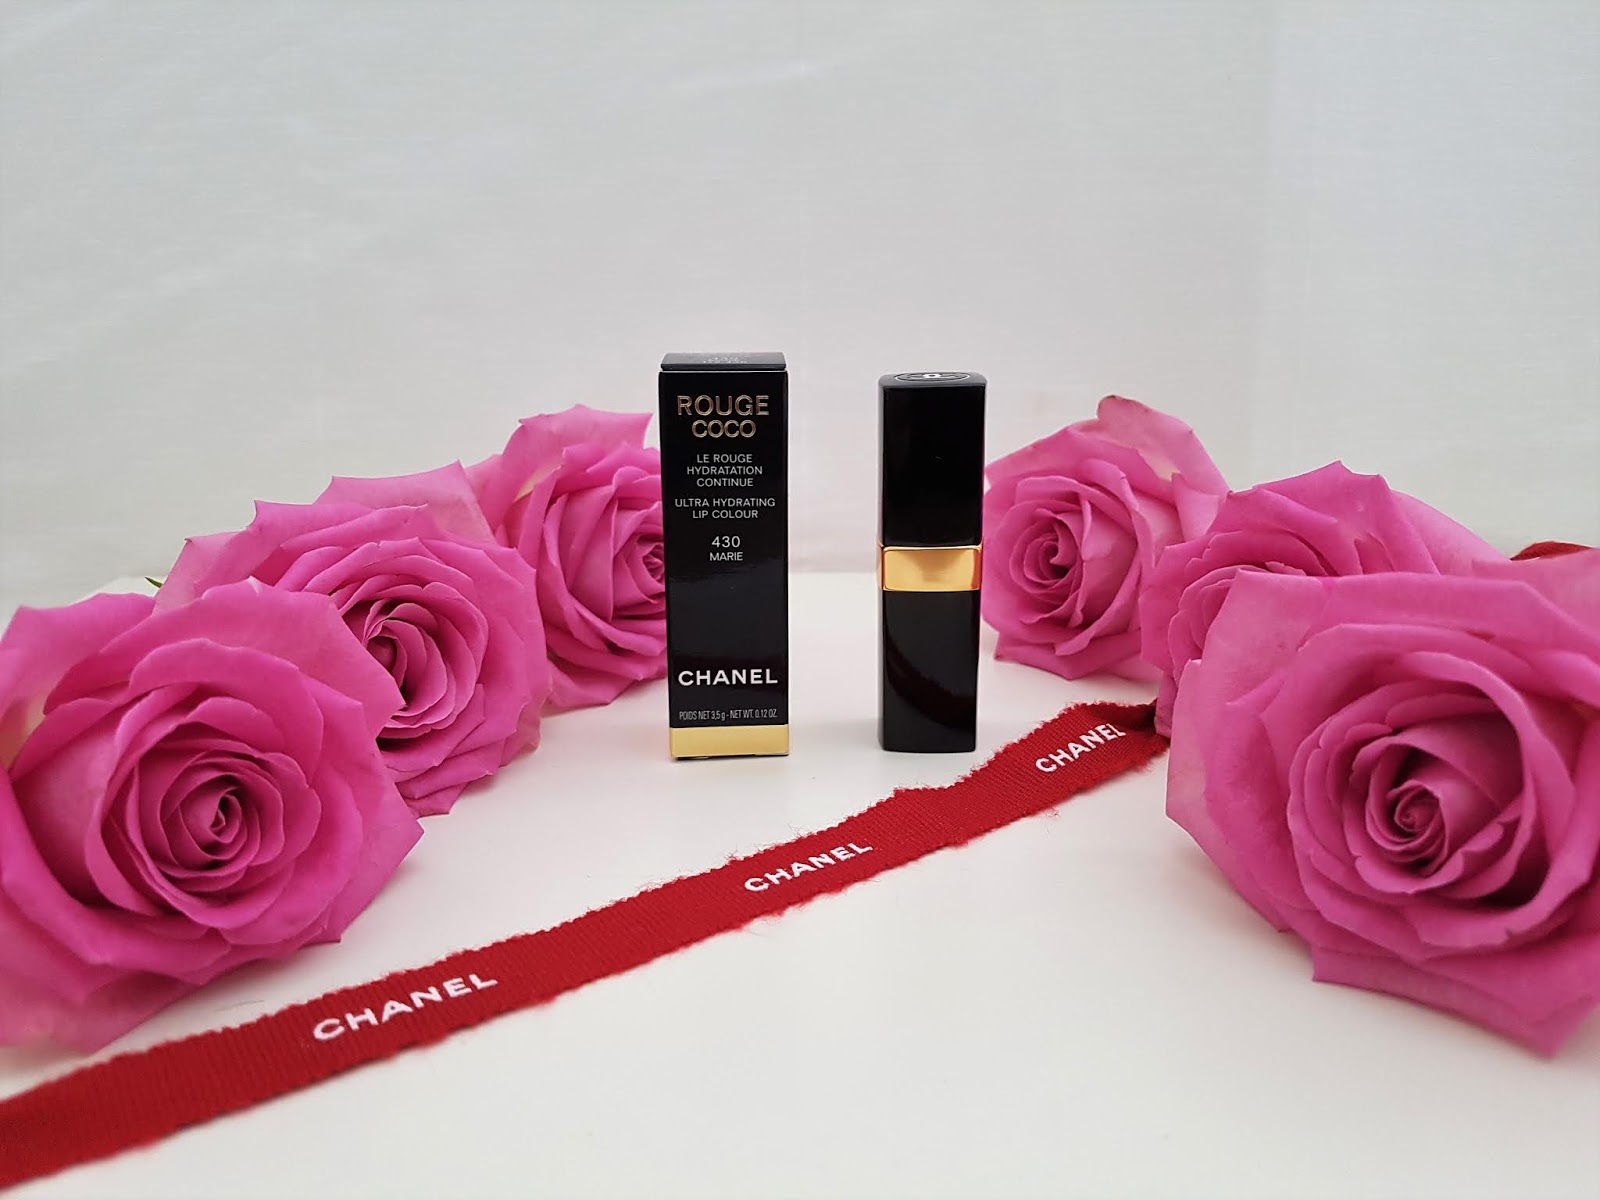 Chanel Fleurie & Charmeuse Rouge Allure Lipsticks Reviews, Photos, Swatches